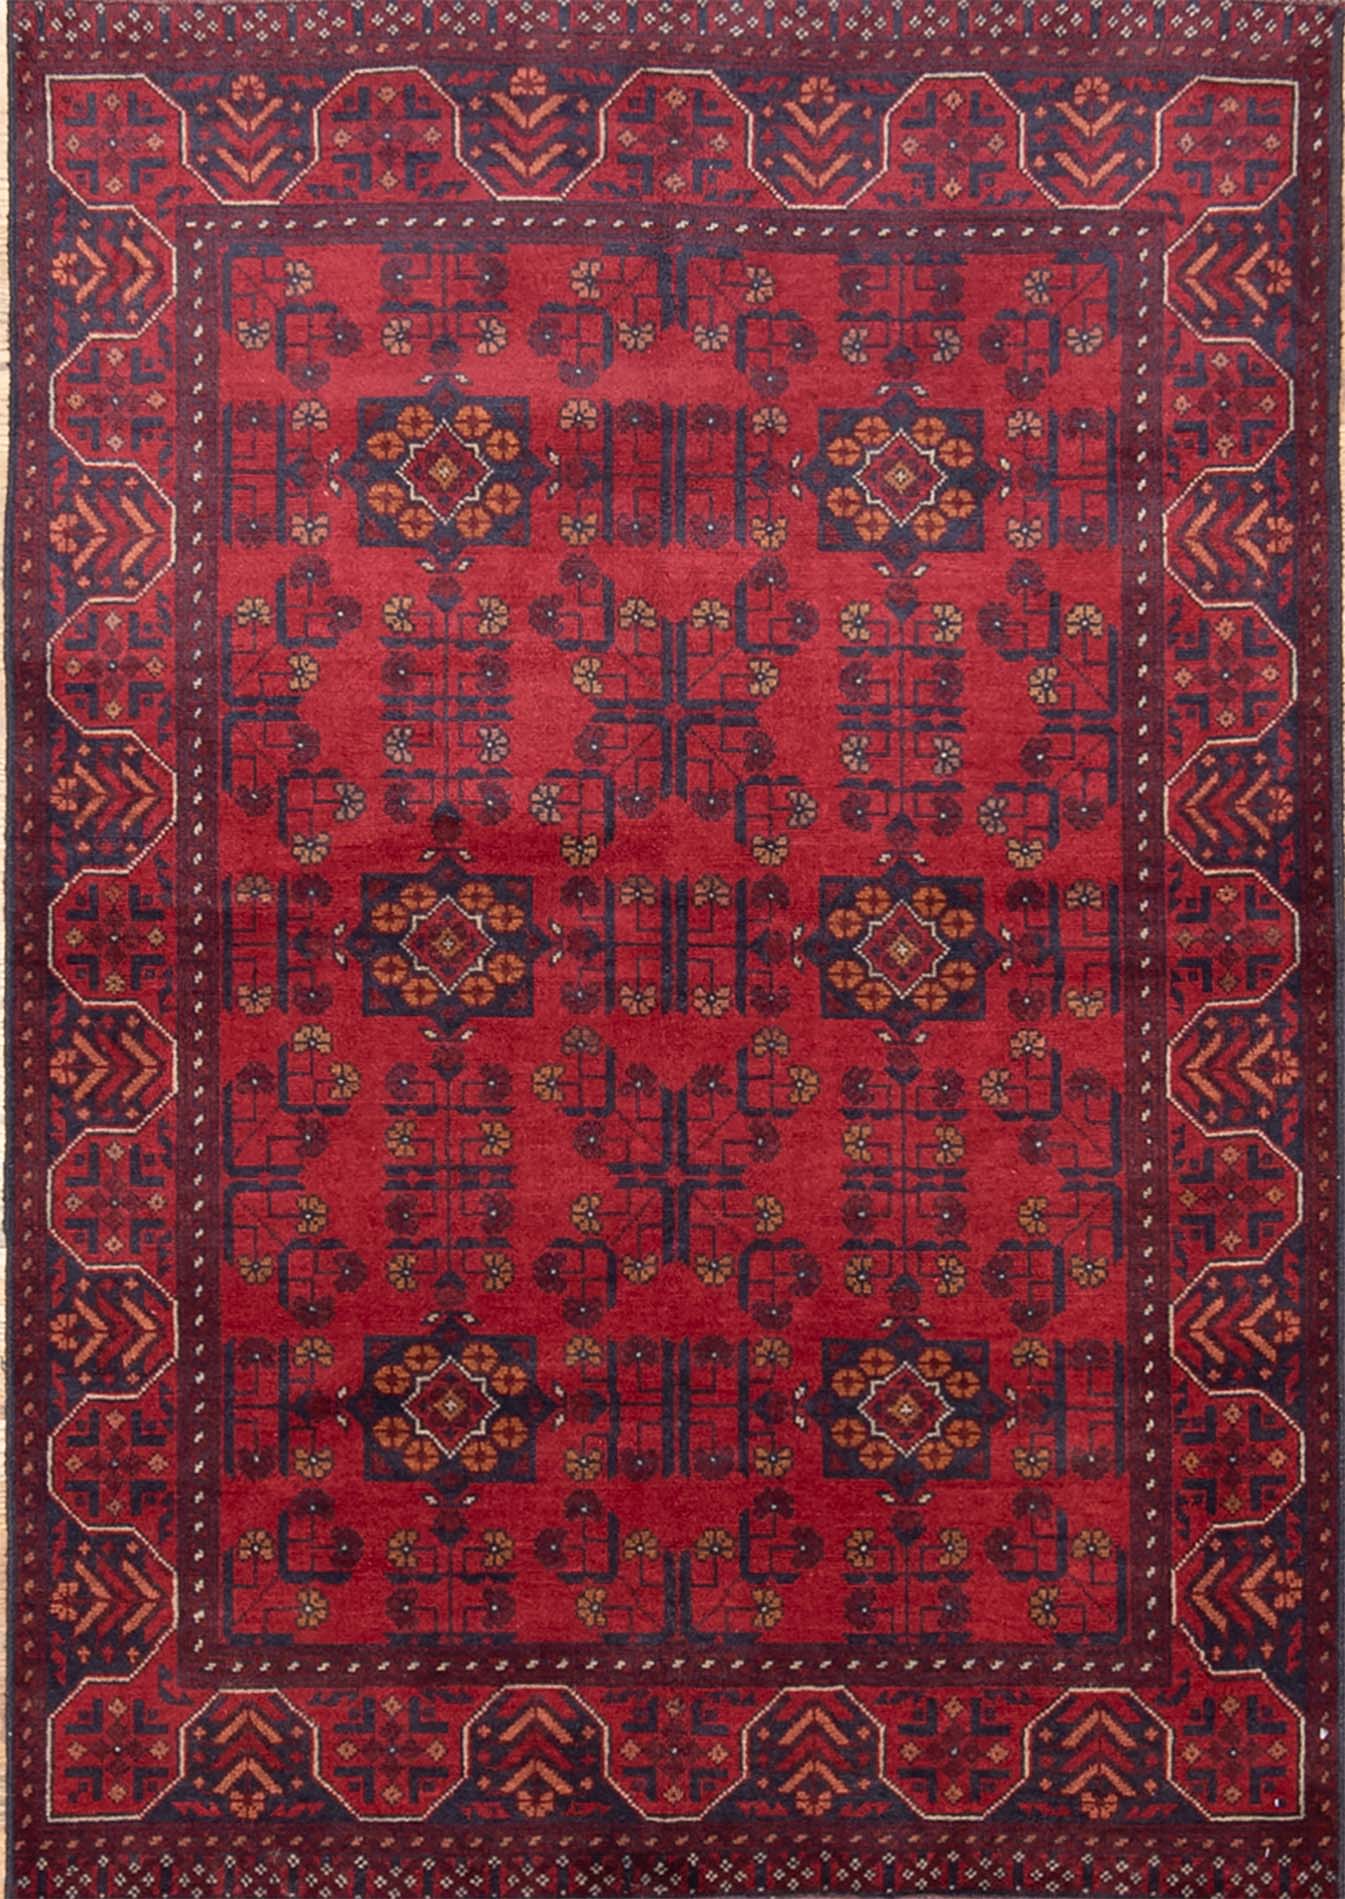 Wool 4x6 rug. Hand knotted tribal wool rug in red color made in Afghanistan.